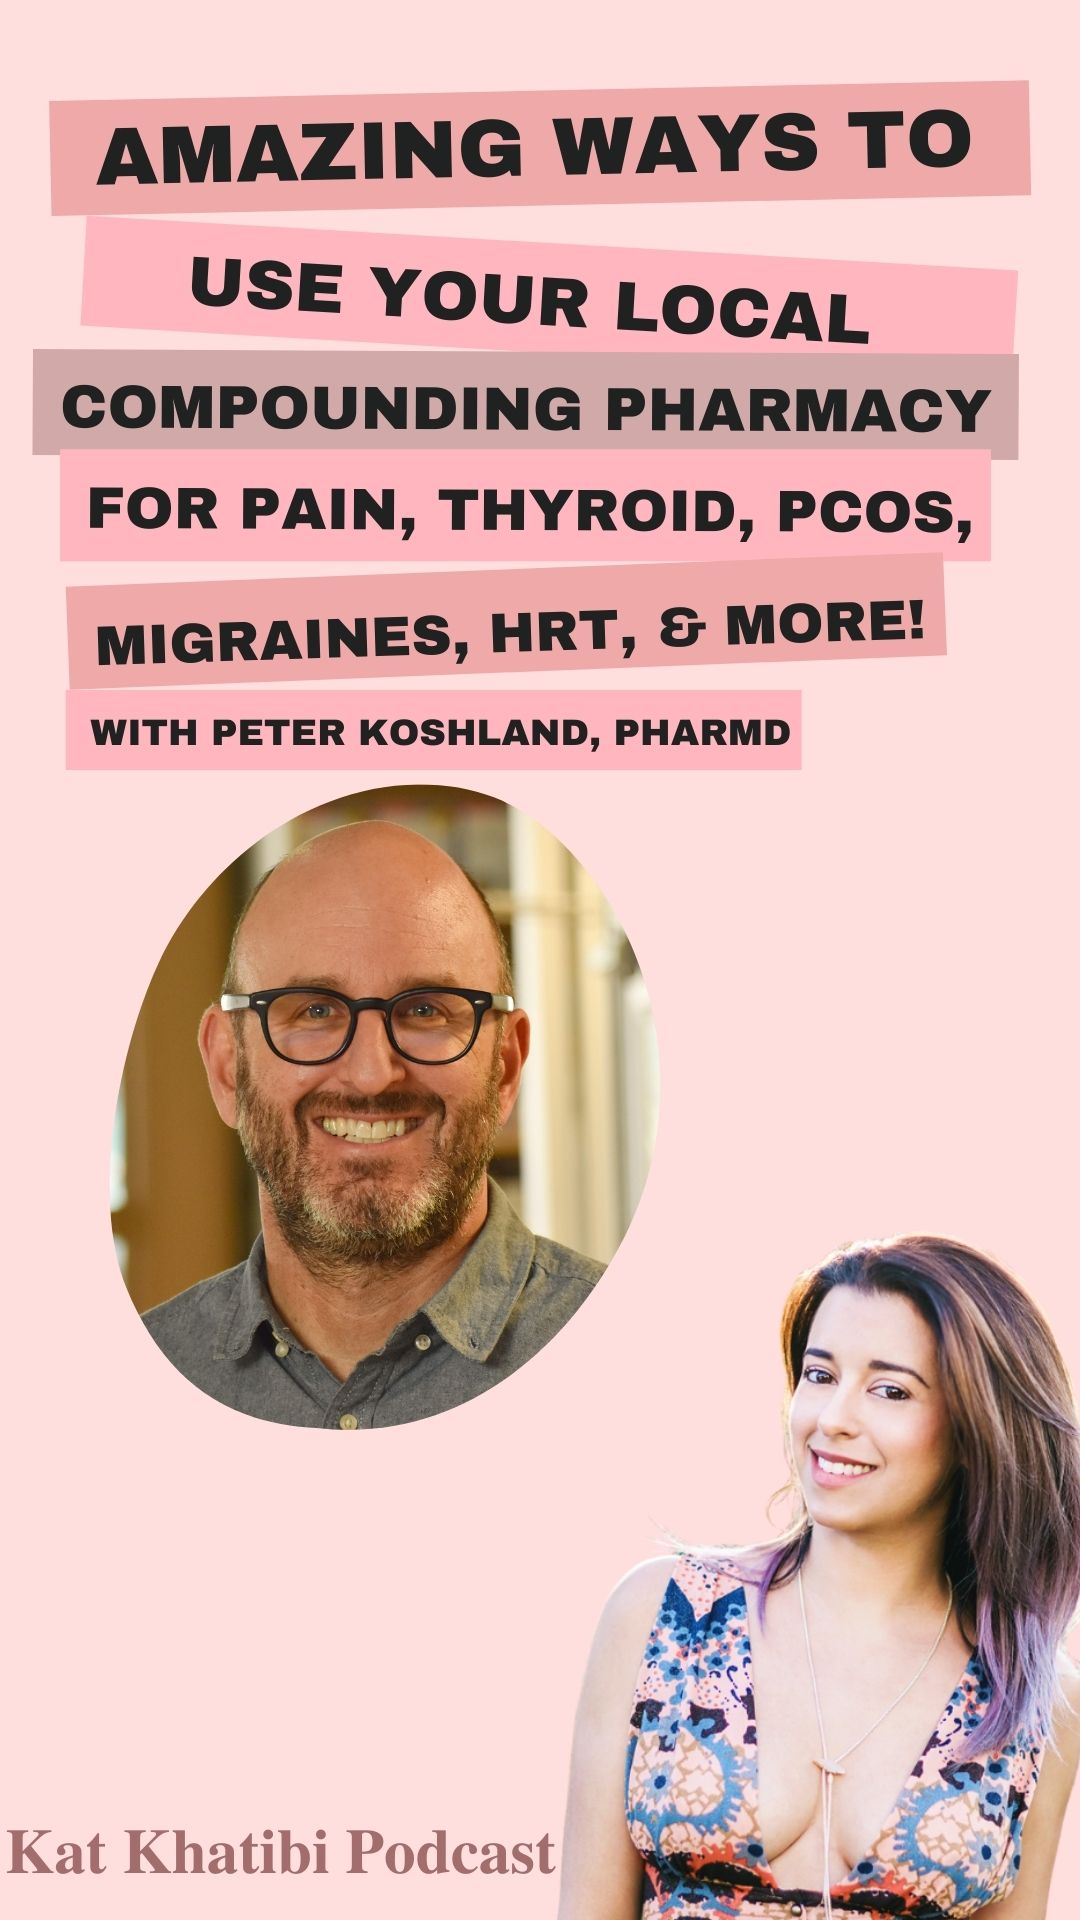 Amazing Ways To Use Your Local Compounding Pharmacy for pain, thyroid, PCOS, migraines, HRT, & more with Peter Koshland, PharmD